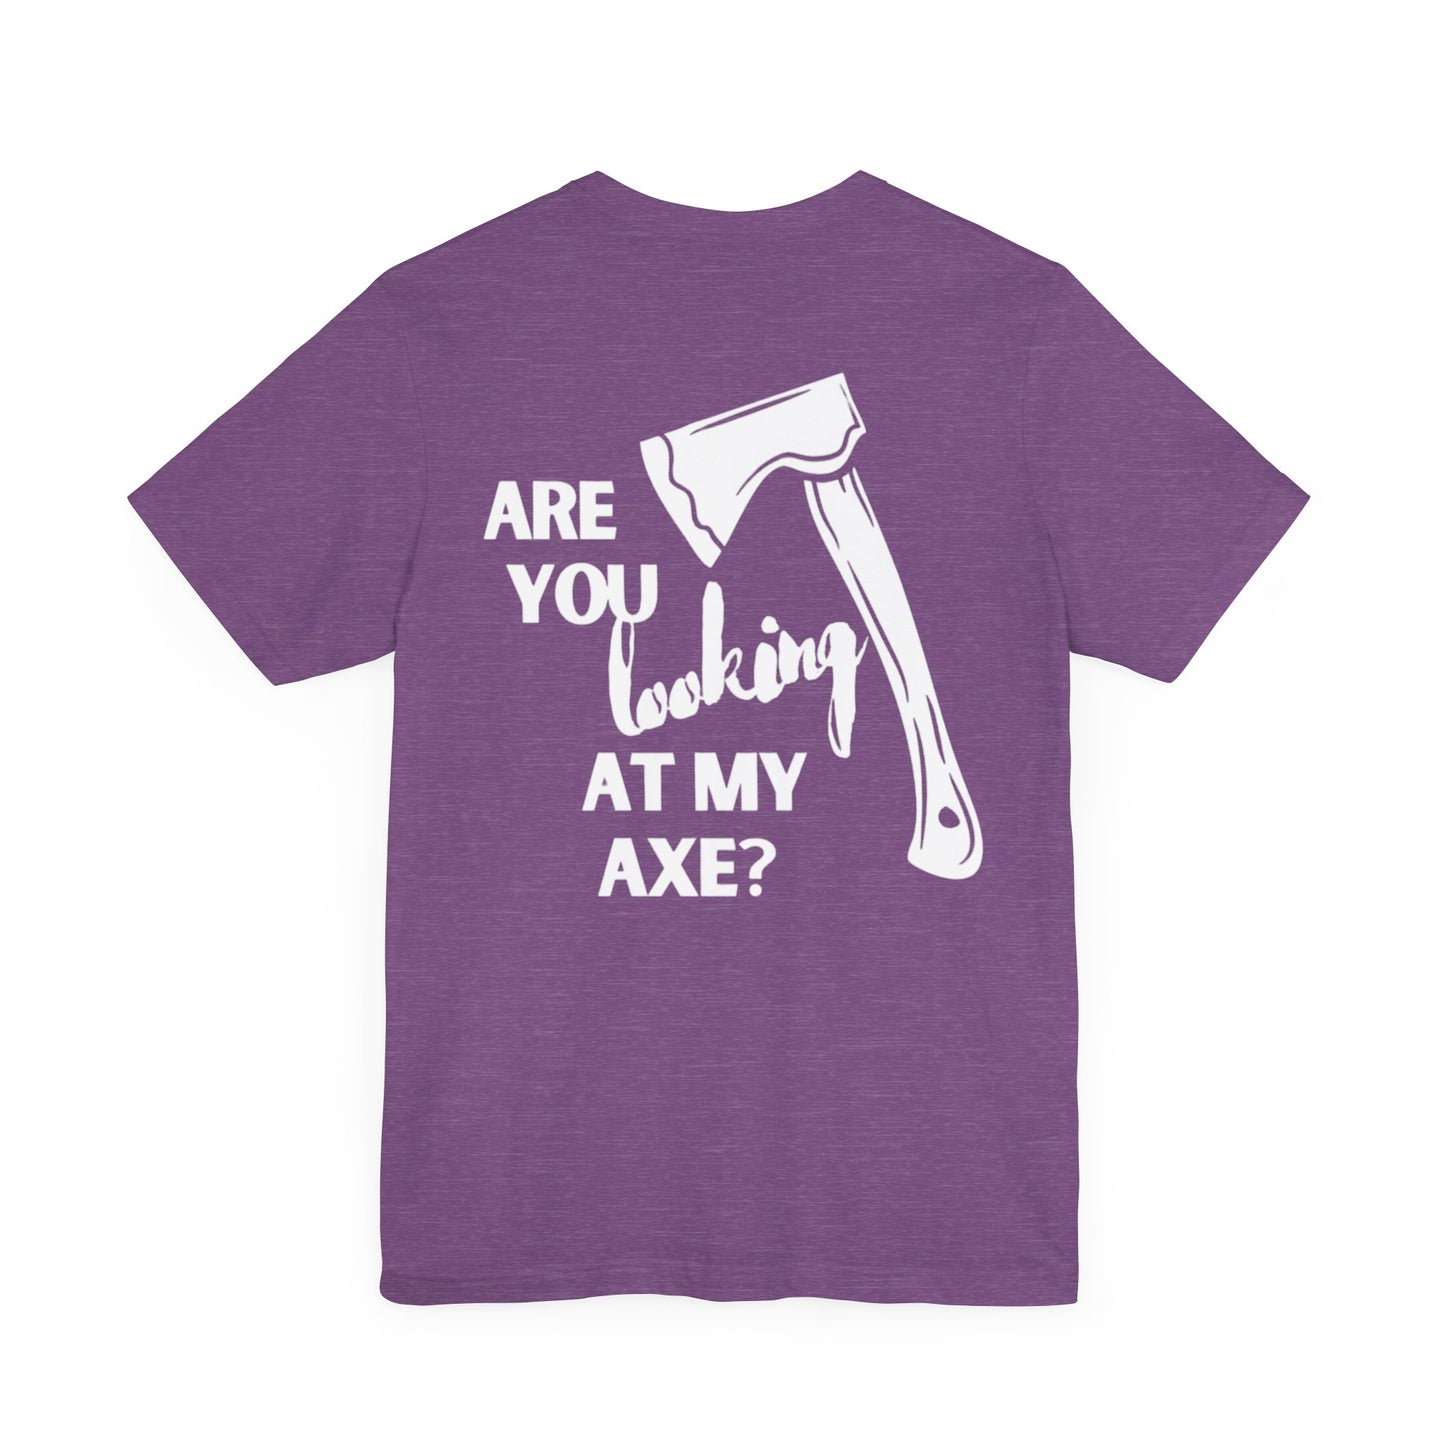 Are you looking at my axe "white"